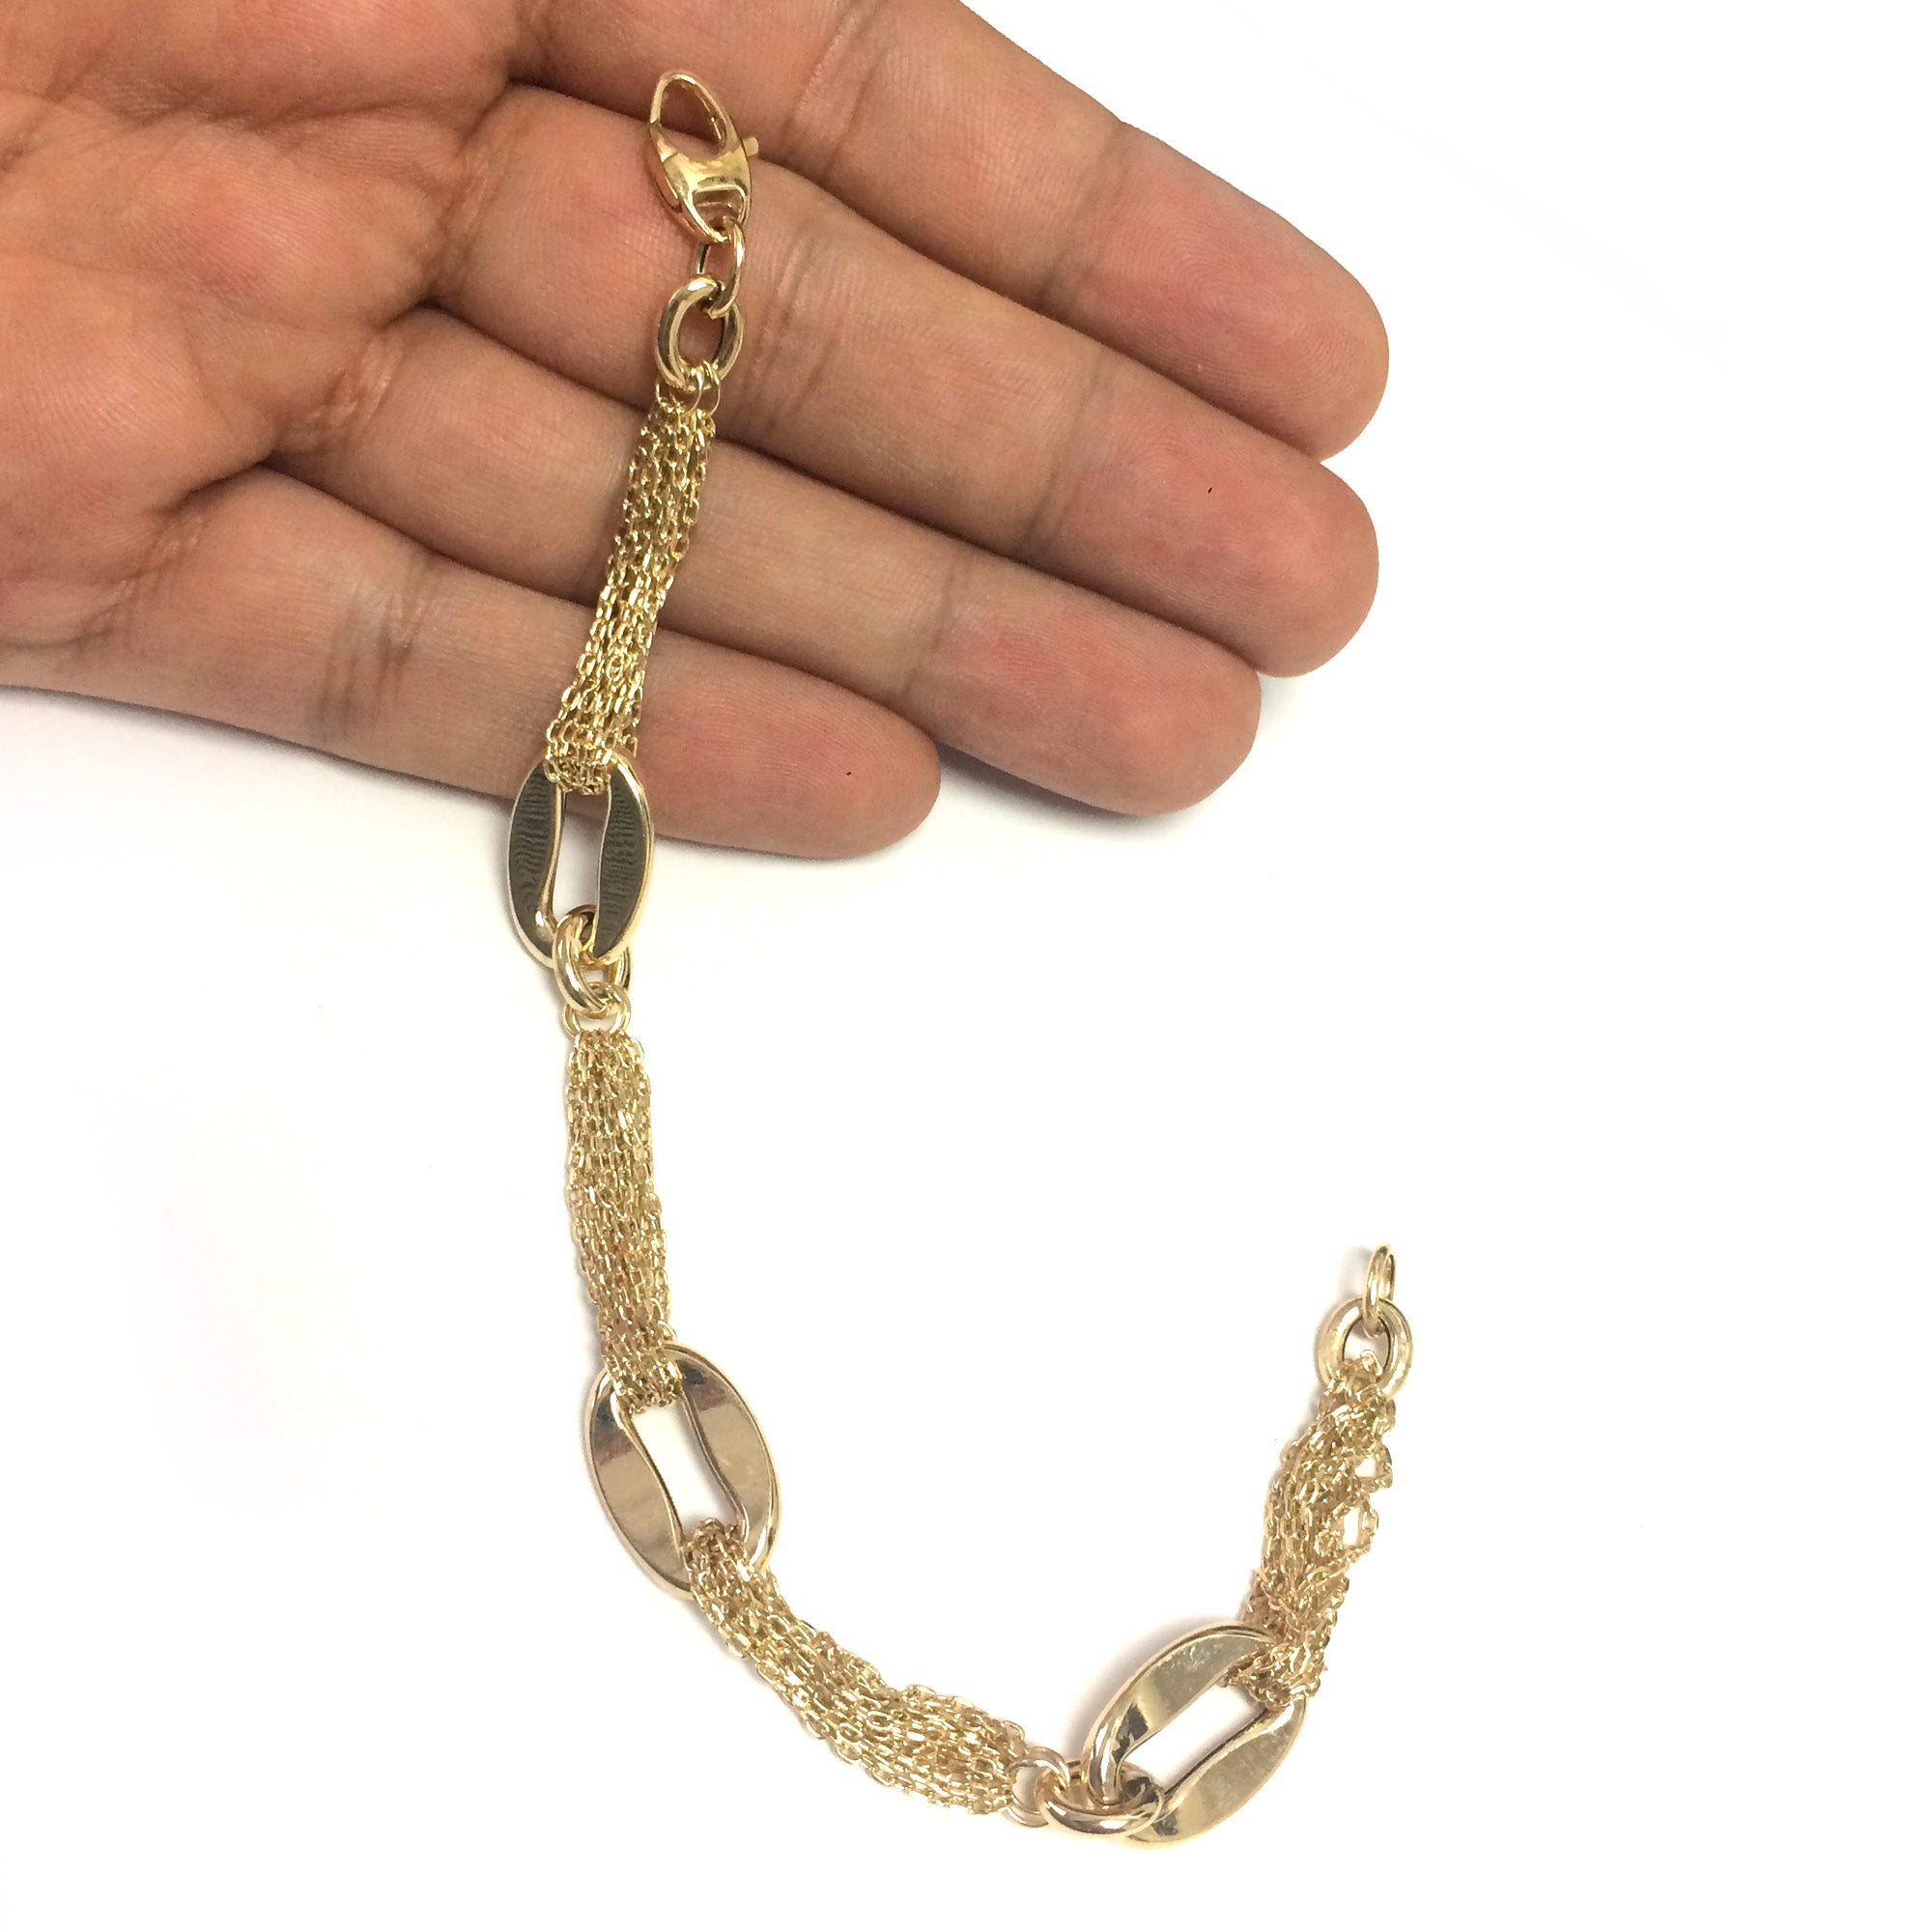 14k Yellow Gold Three Curved Oval Link Multi Stranded Cable Chain Bracelet, 7.5"